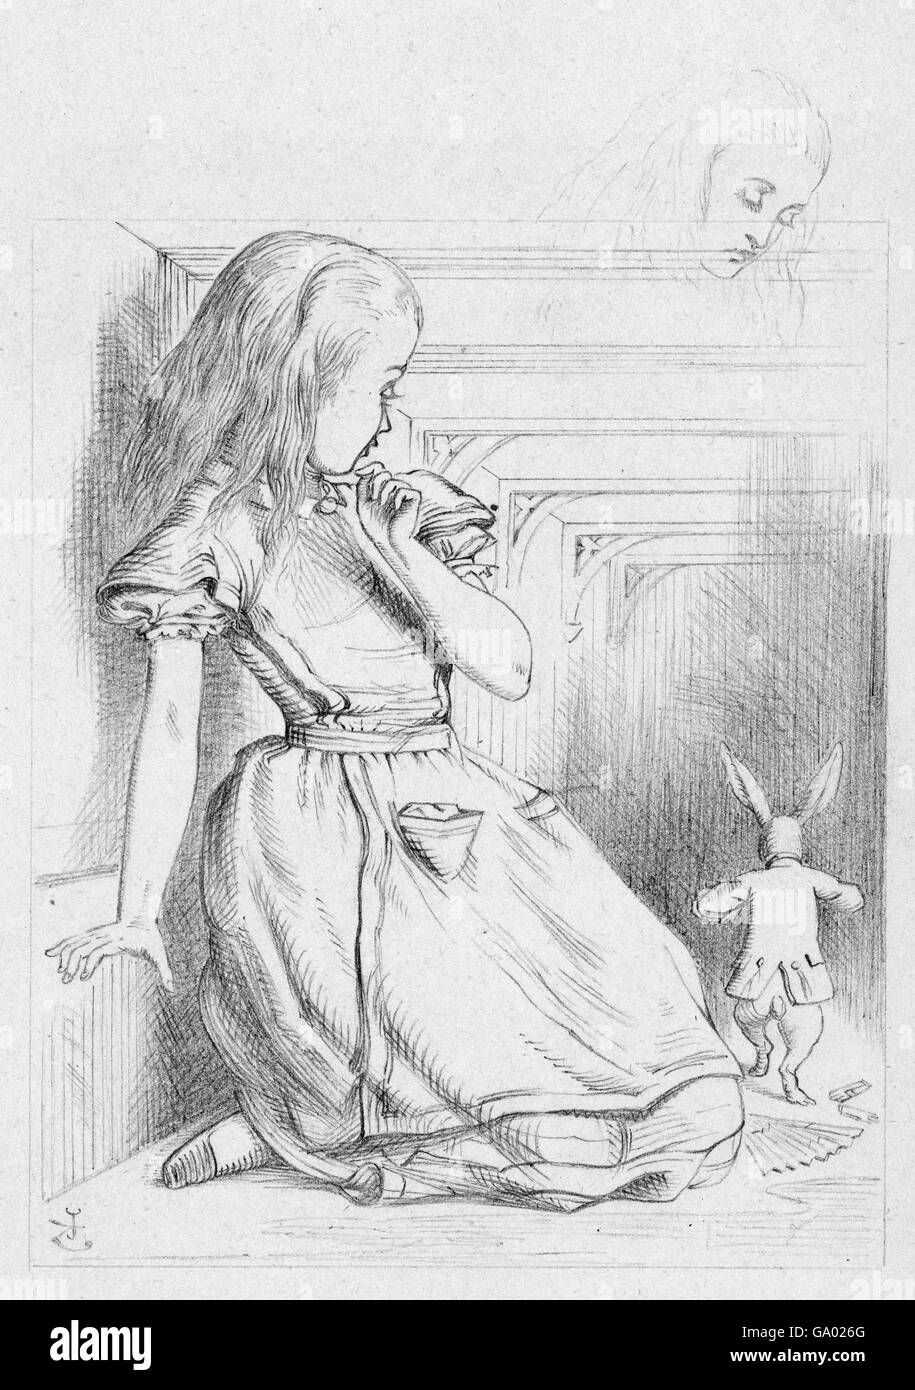 Alice in Wonderland. 'The Rabbit Scurried', an illustration by Sir John Tenniel for Lewis Carroll's 'Alice in Wonderland' showing Alice and the White Rabbit. Pencil drawing on paper, c.1866. Stock Photo